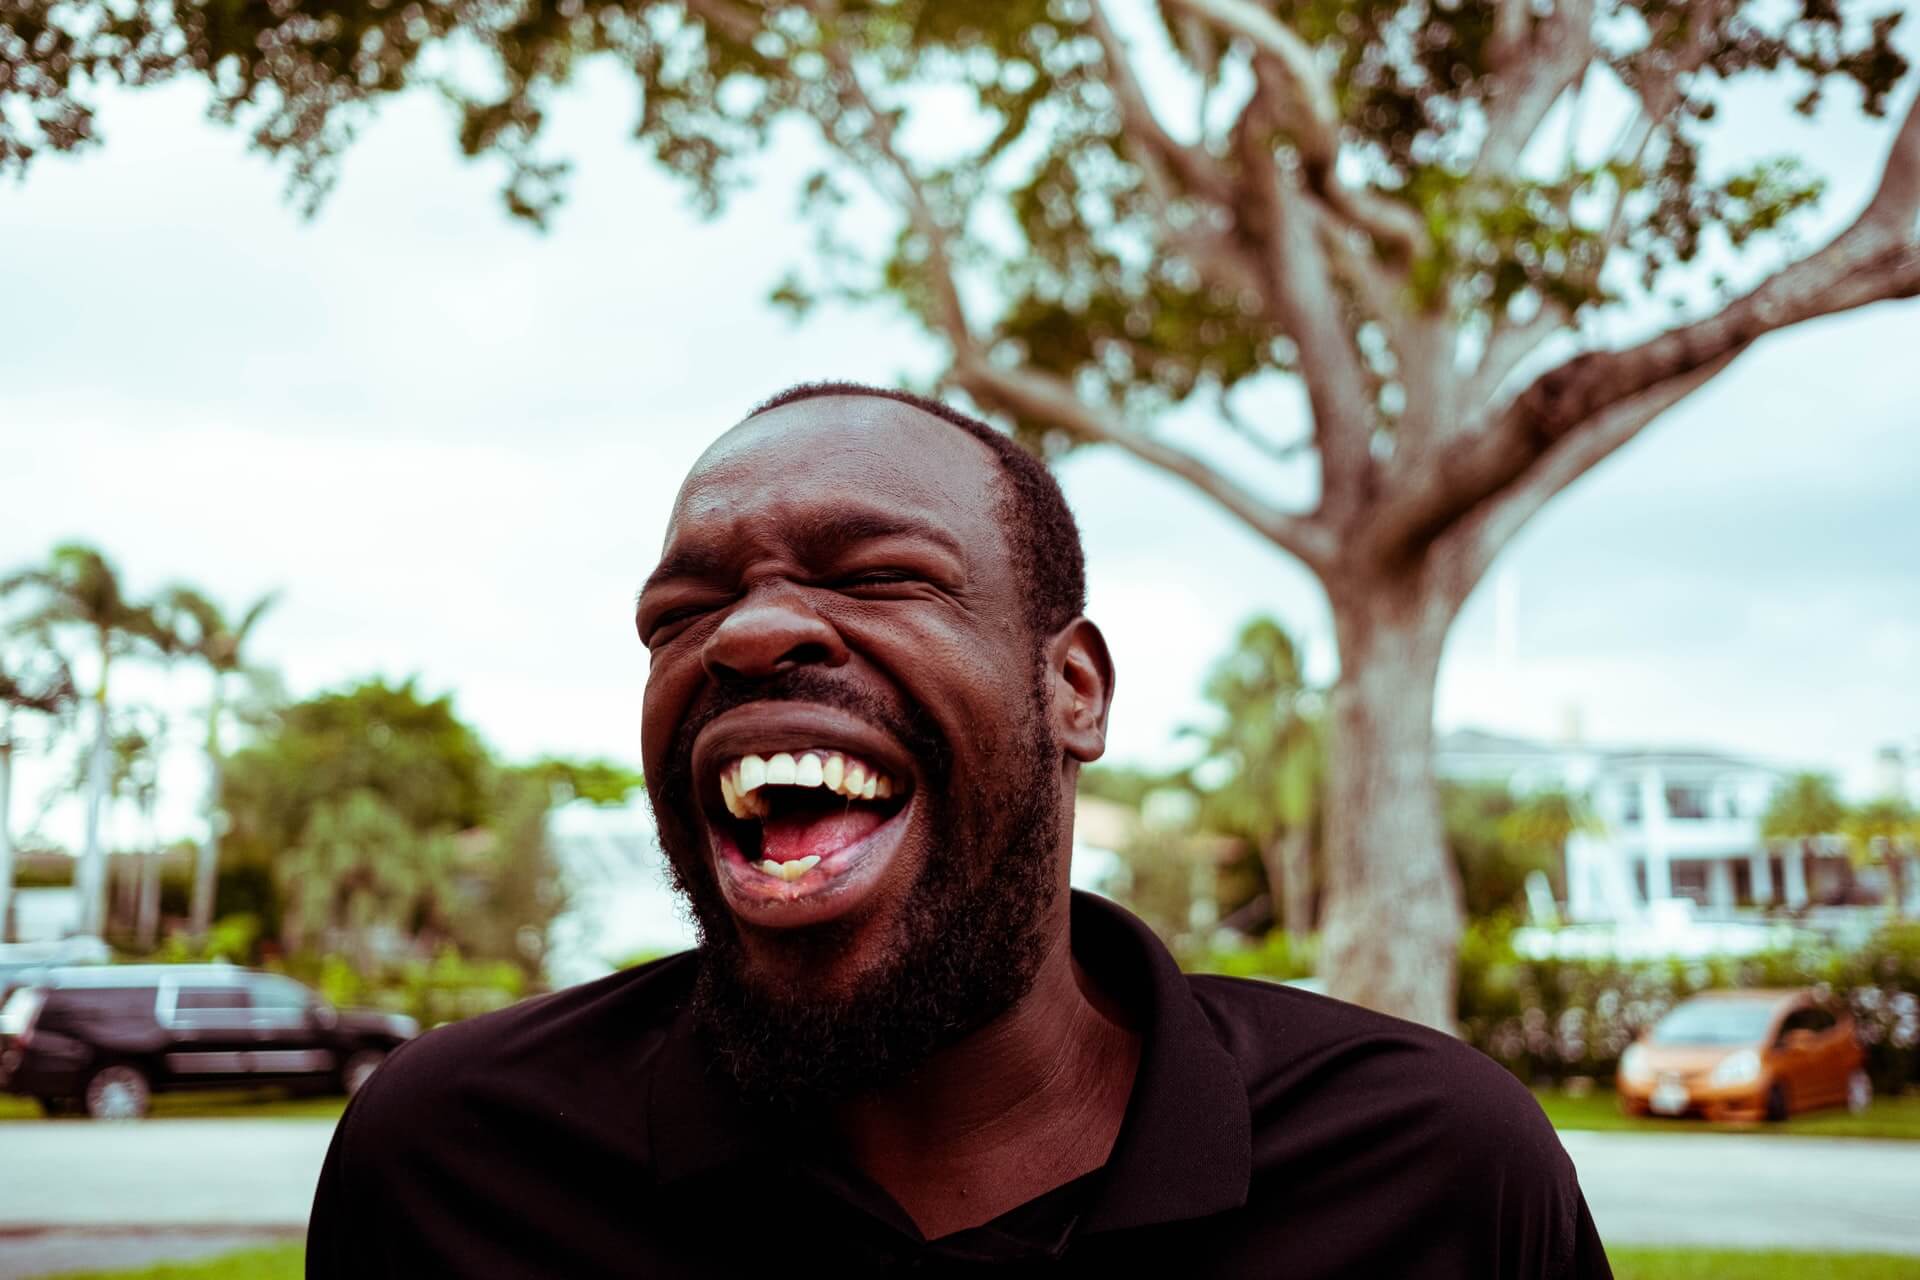 A portrait of a black man laughing on a sunny day